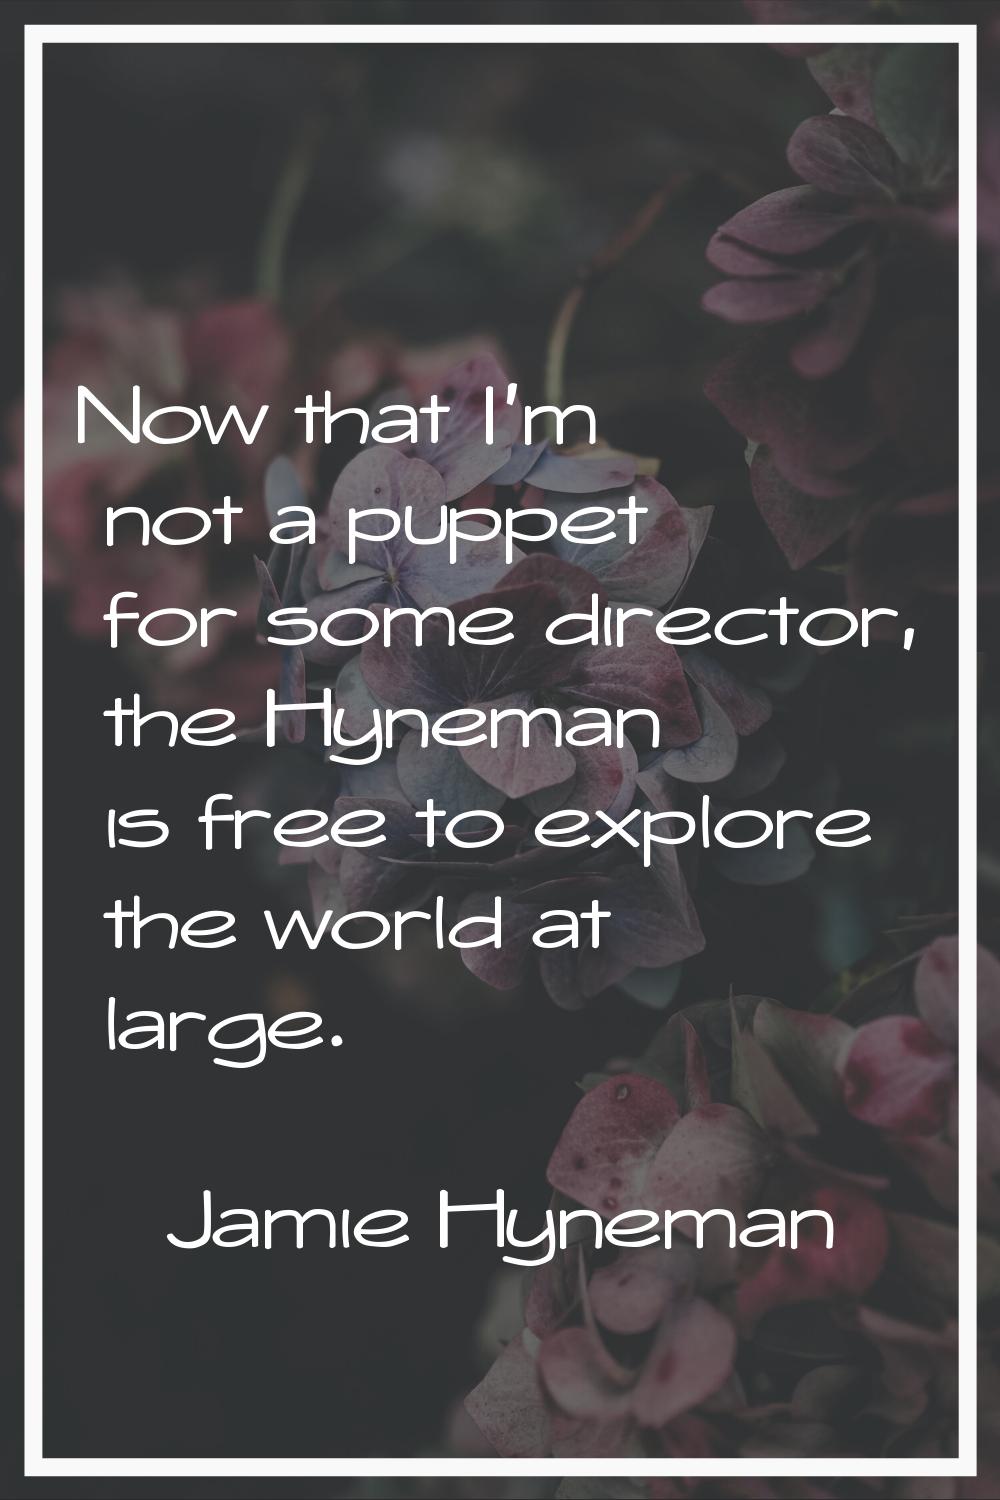 Now that I'm not a puppet for some director, the Hyneman is free to explore the world at large.